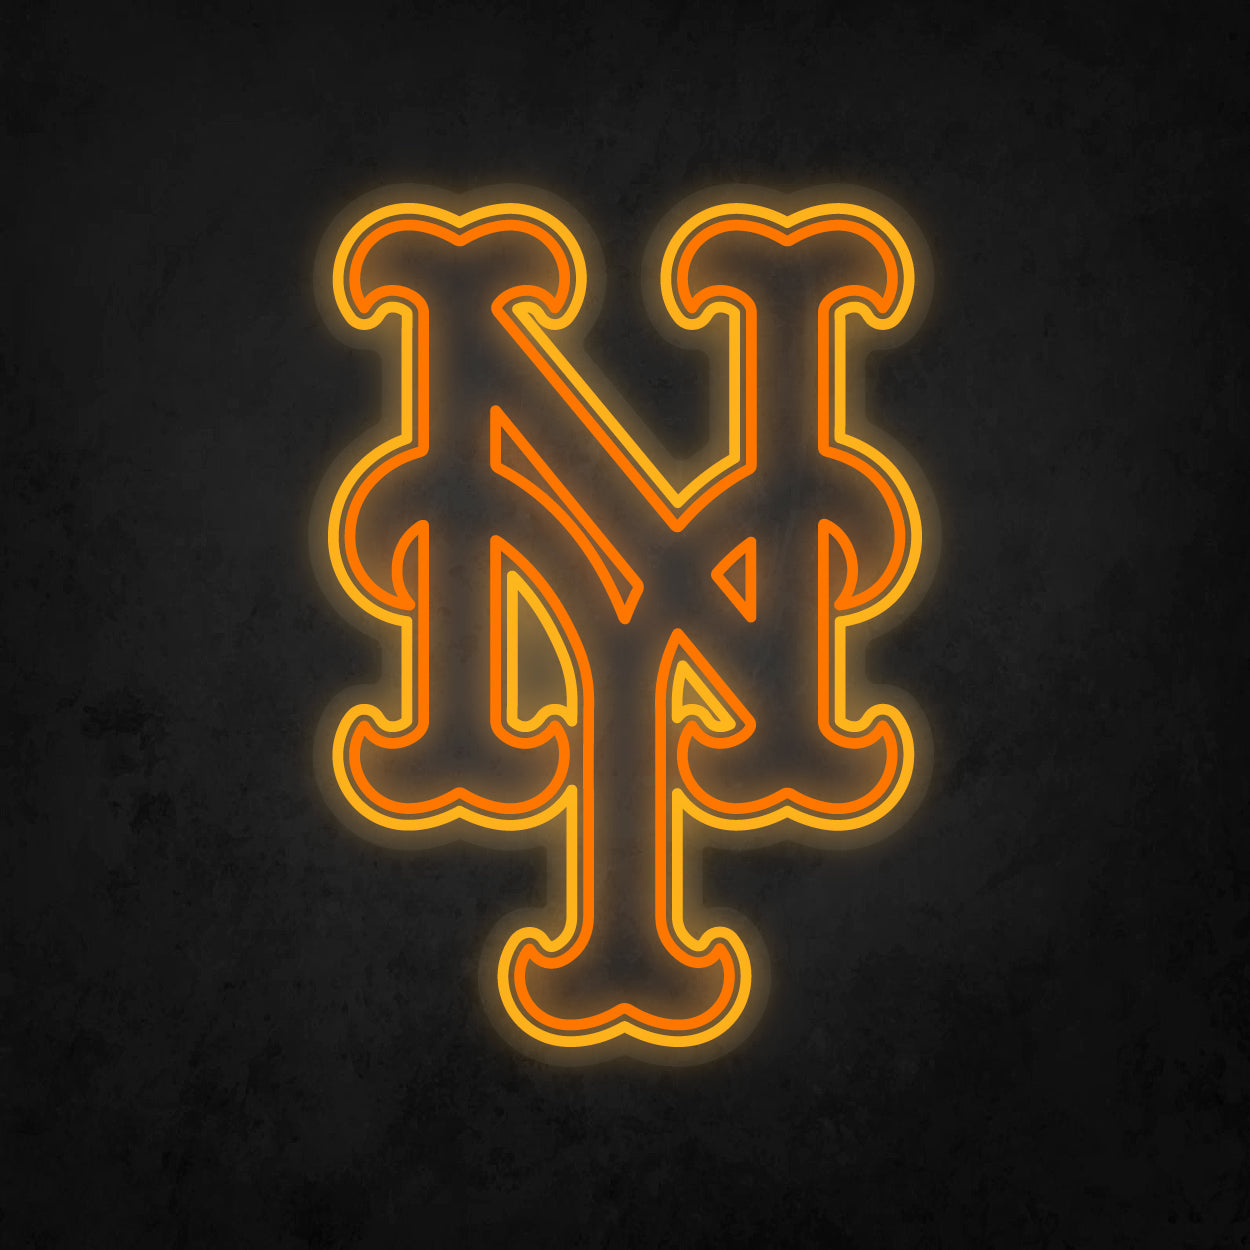 LED Neon Sign - New York Mets Large